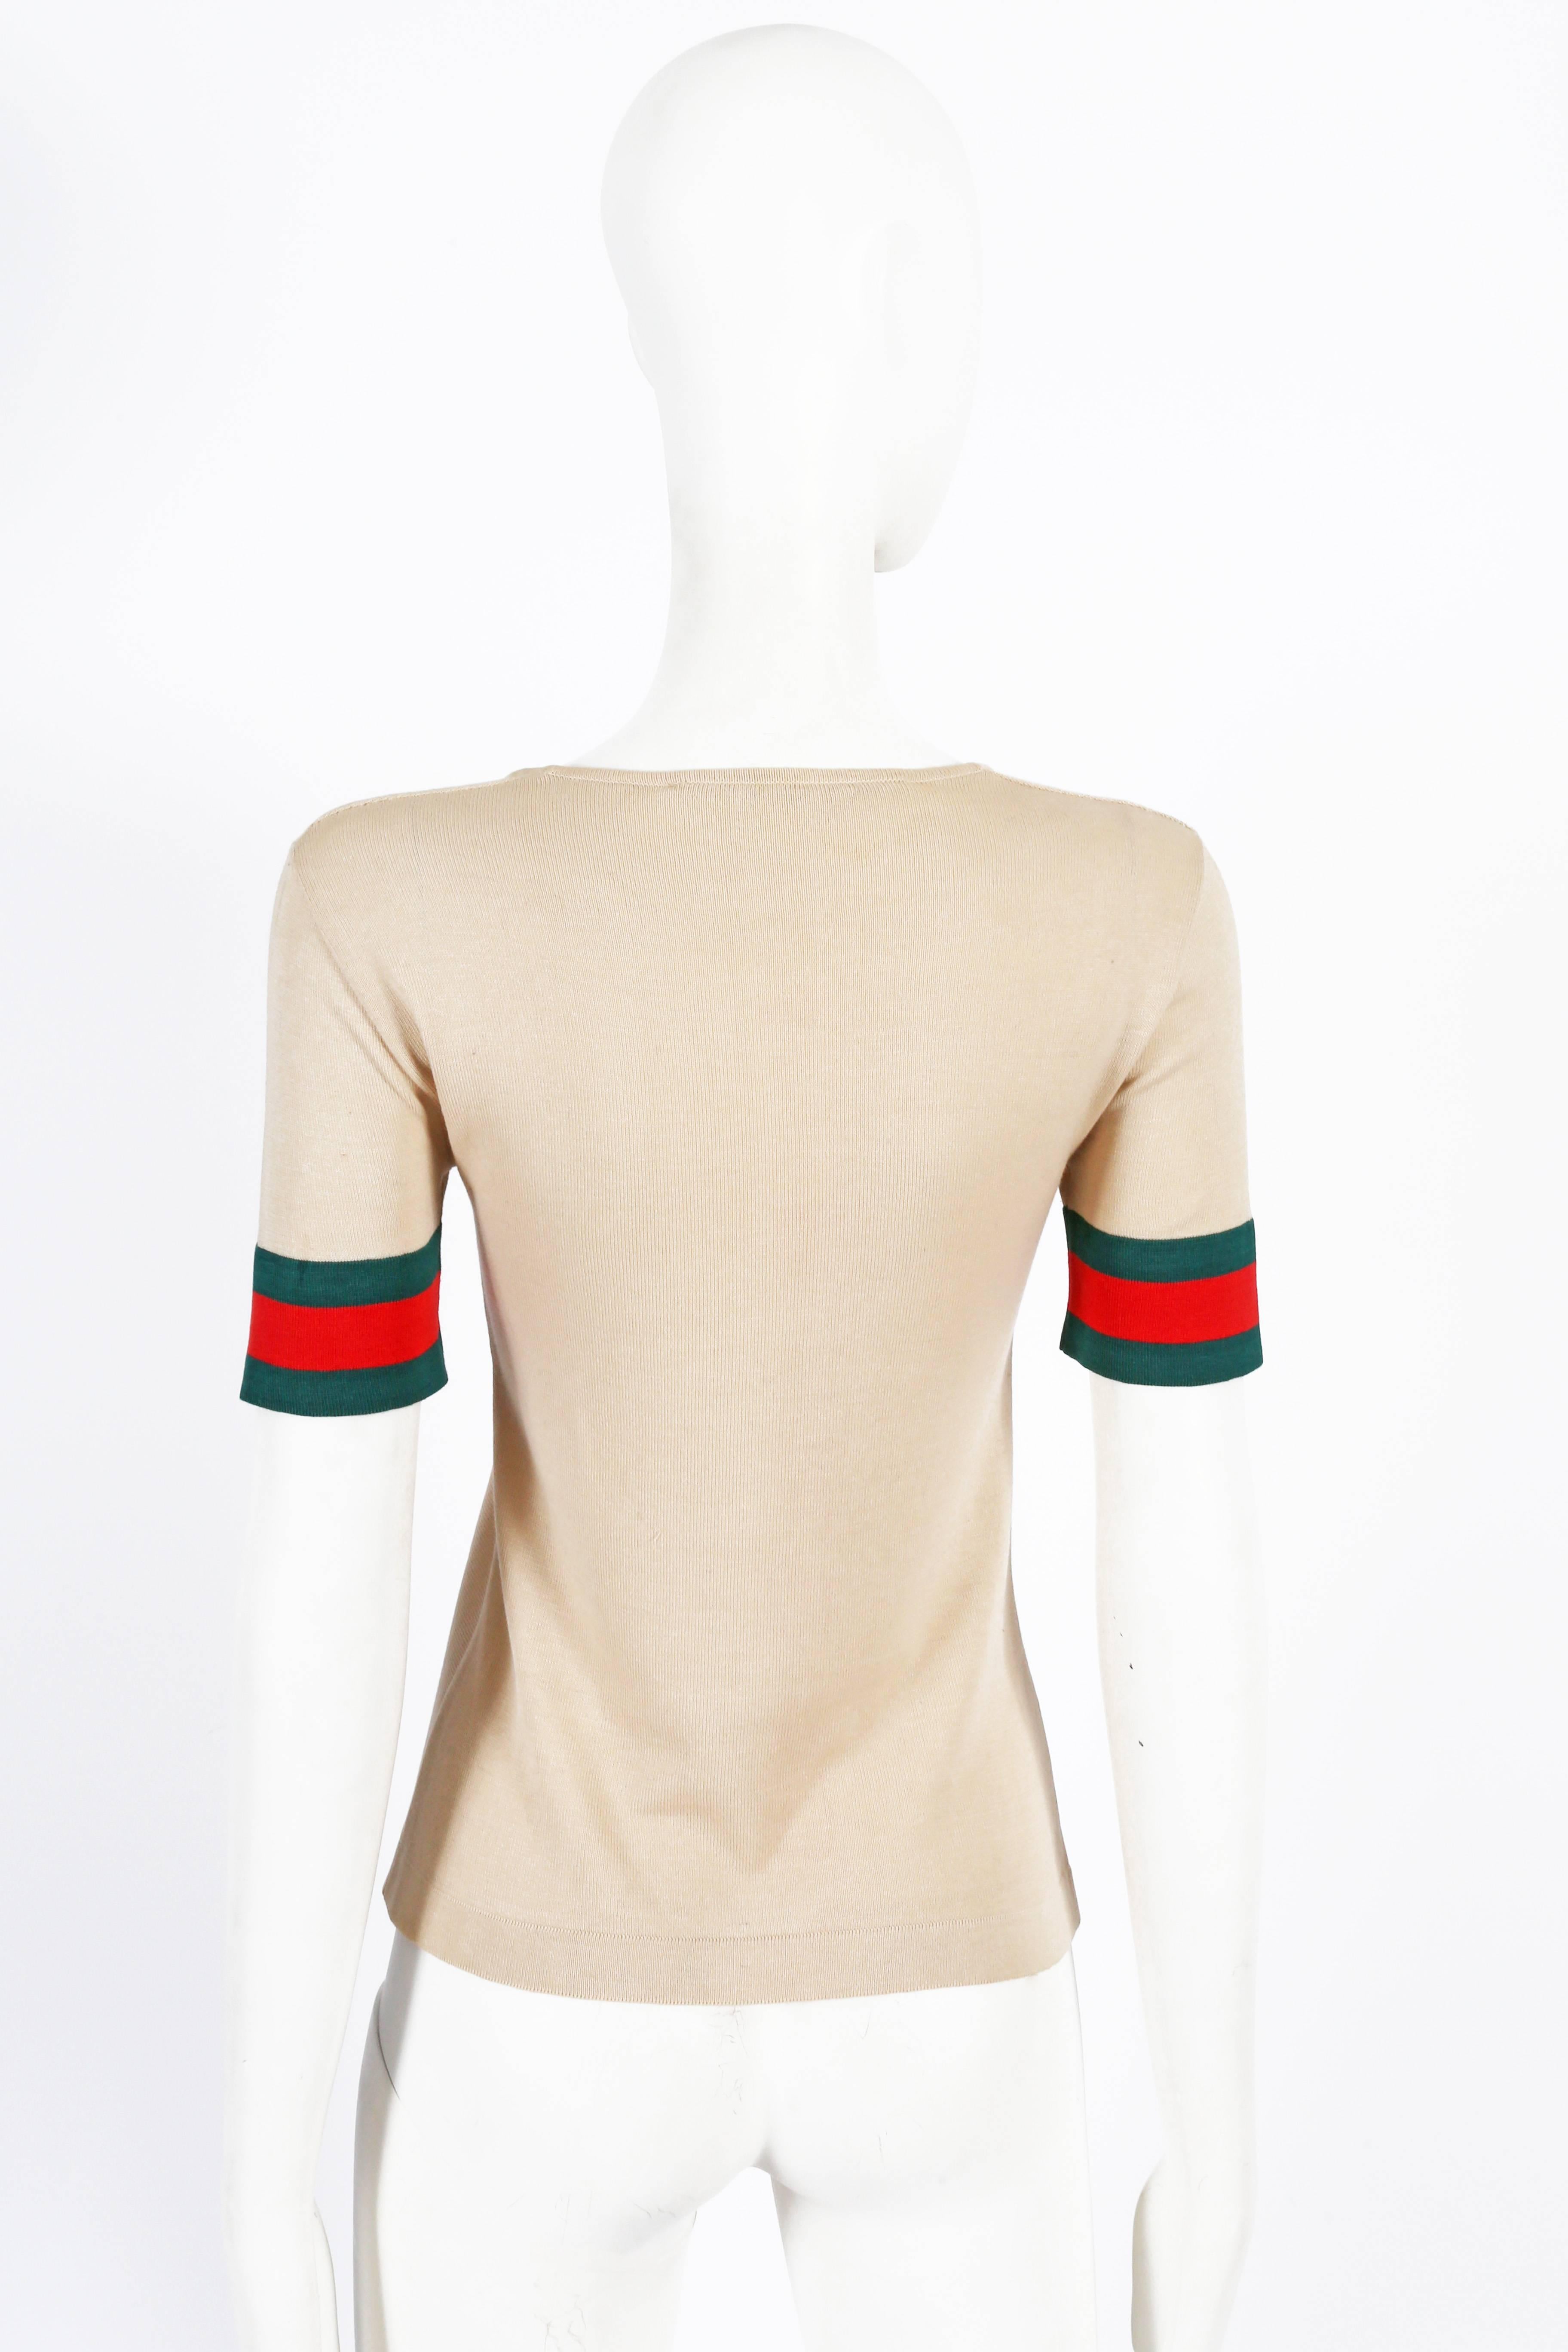 Women's Gucci iconic striped knitted t-shirt, circa 1970s